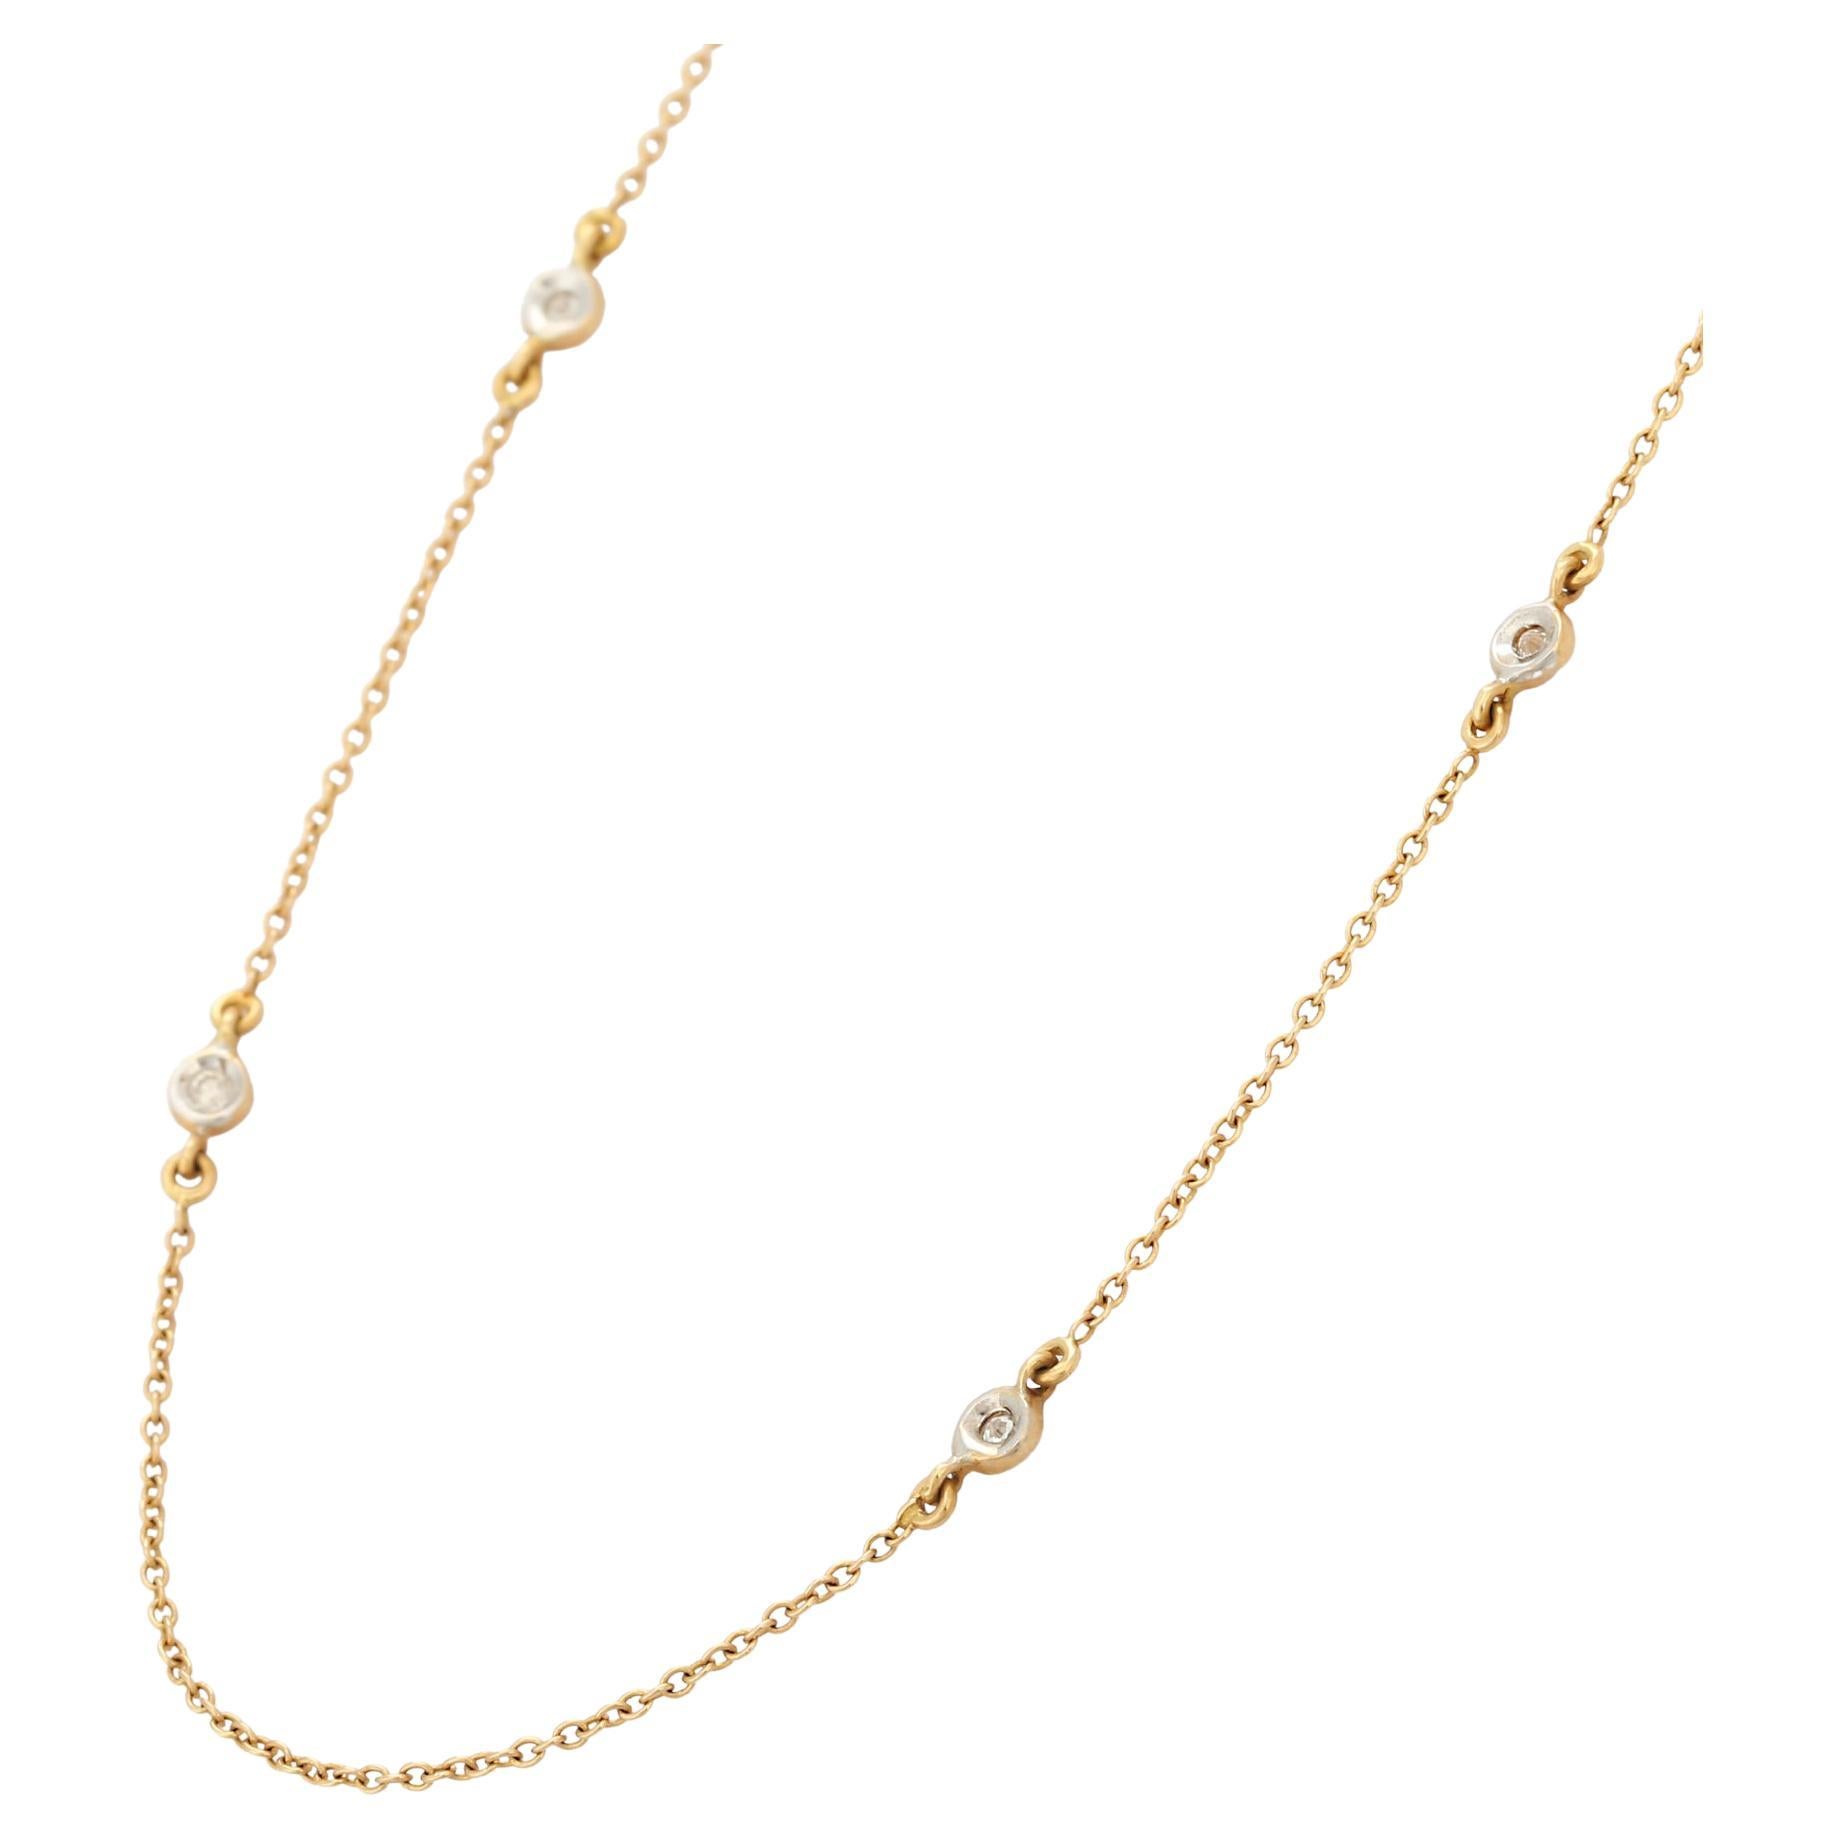 Diamond Beaded Necklace in 18K Yellow Gold